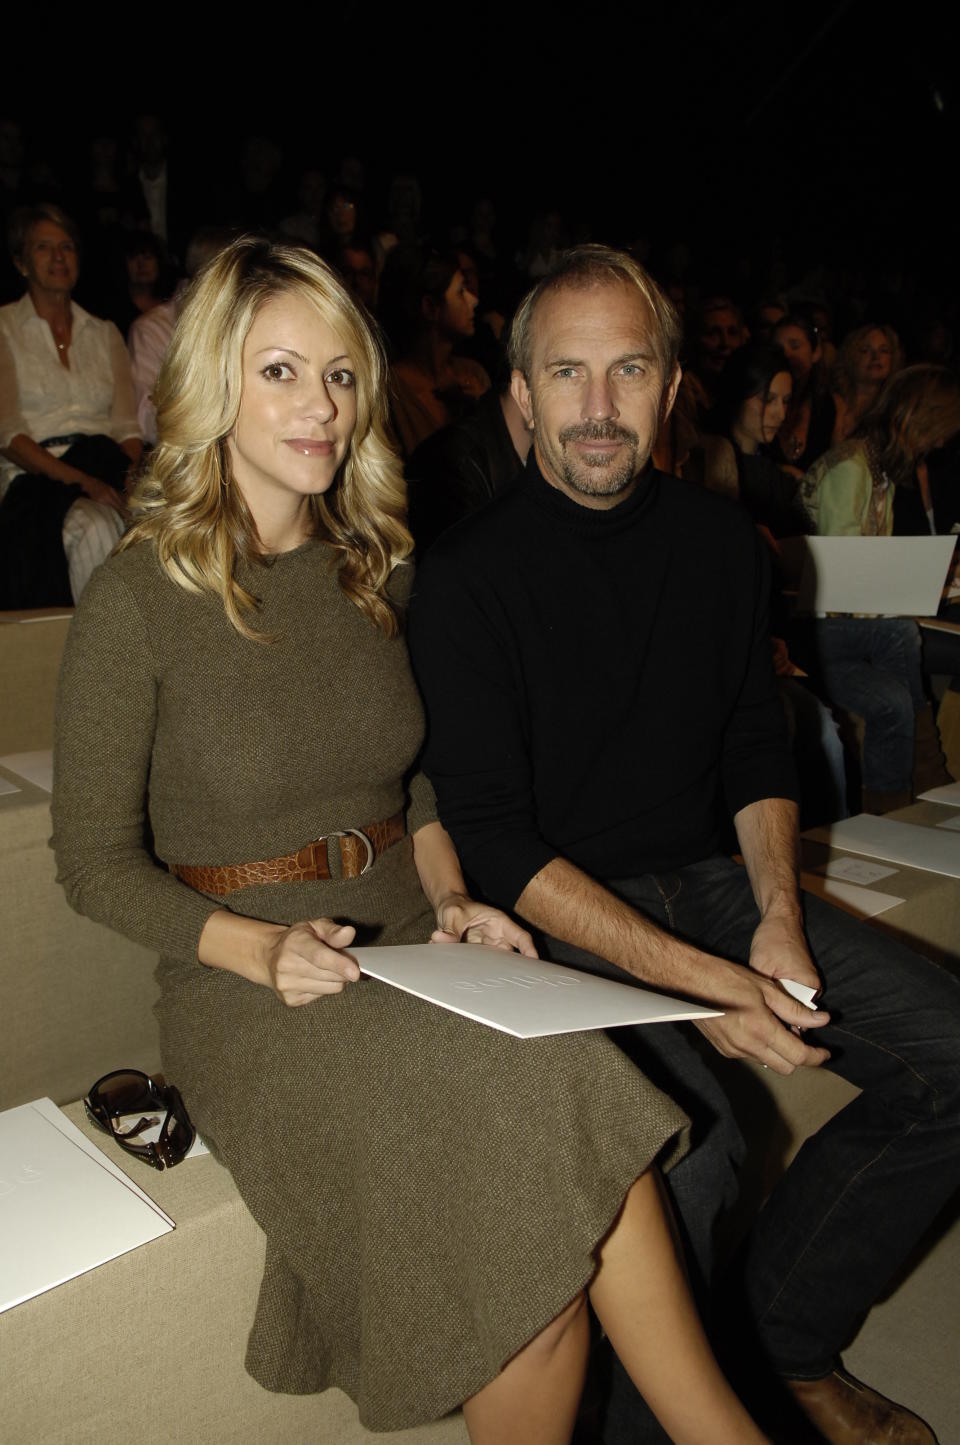 Christine Baumgartner (L) and Kevin Costner attend Chloe's spring 2007 runway show at the Espace Ephemere Tuileries. (Photo by Fairchild Archive/Penske Media via Getty Images)